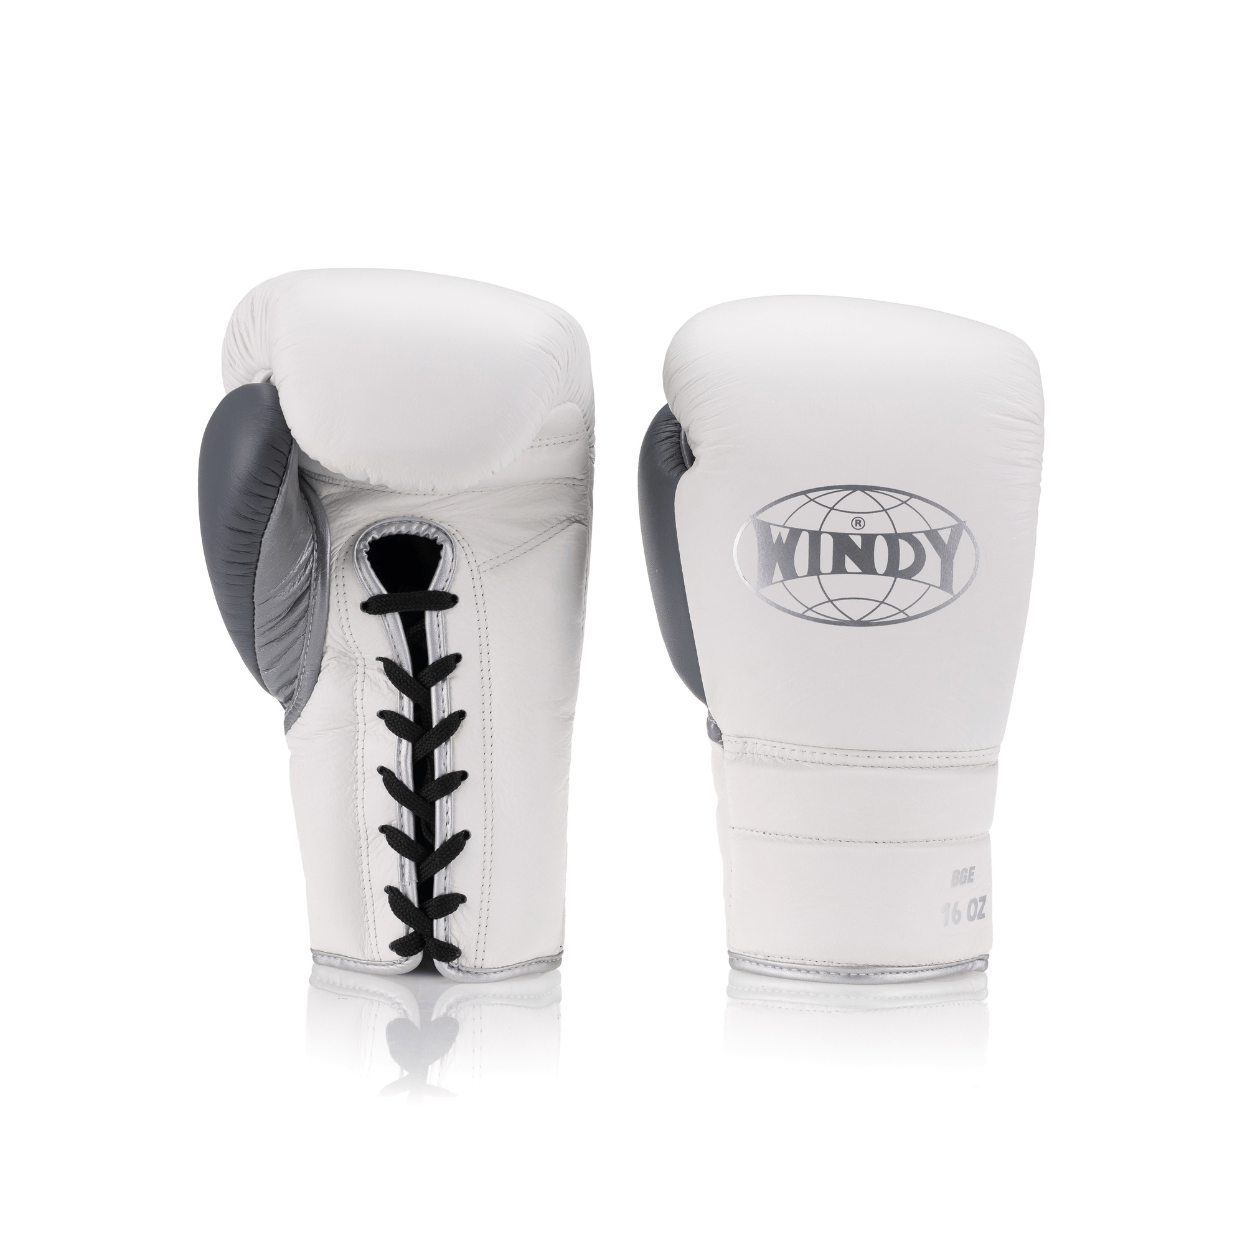 BGE Elite Series Lace-up Boxing Glove - White/Silver/Grey - Windy Fight Gear B.V.